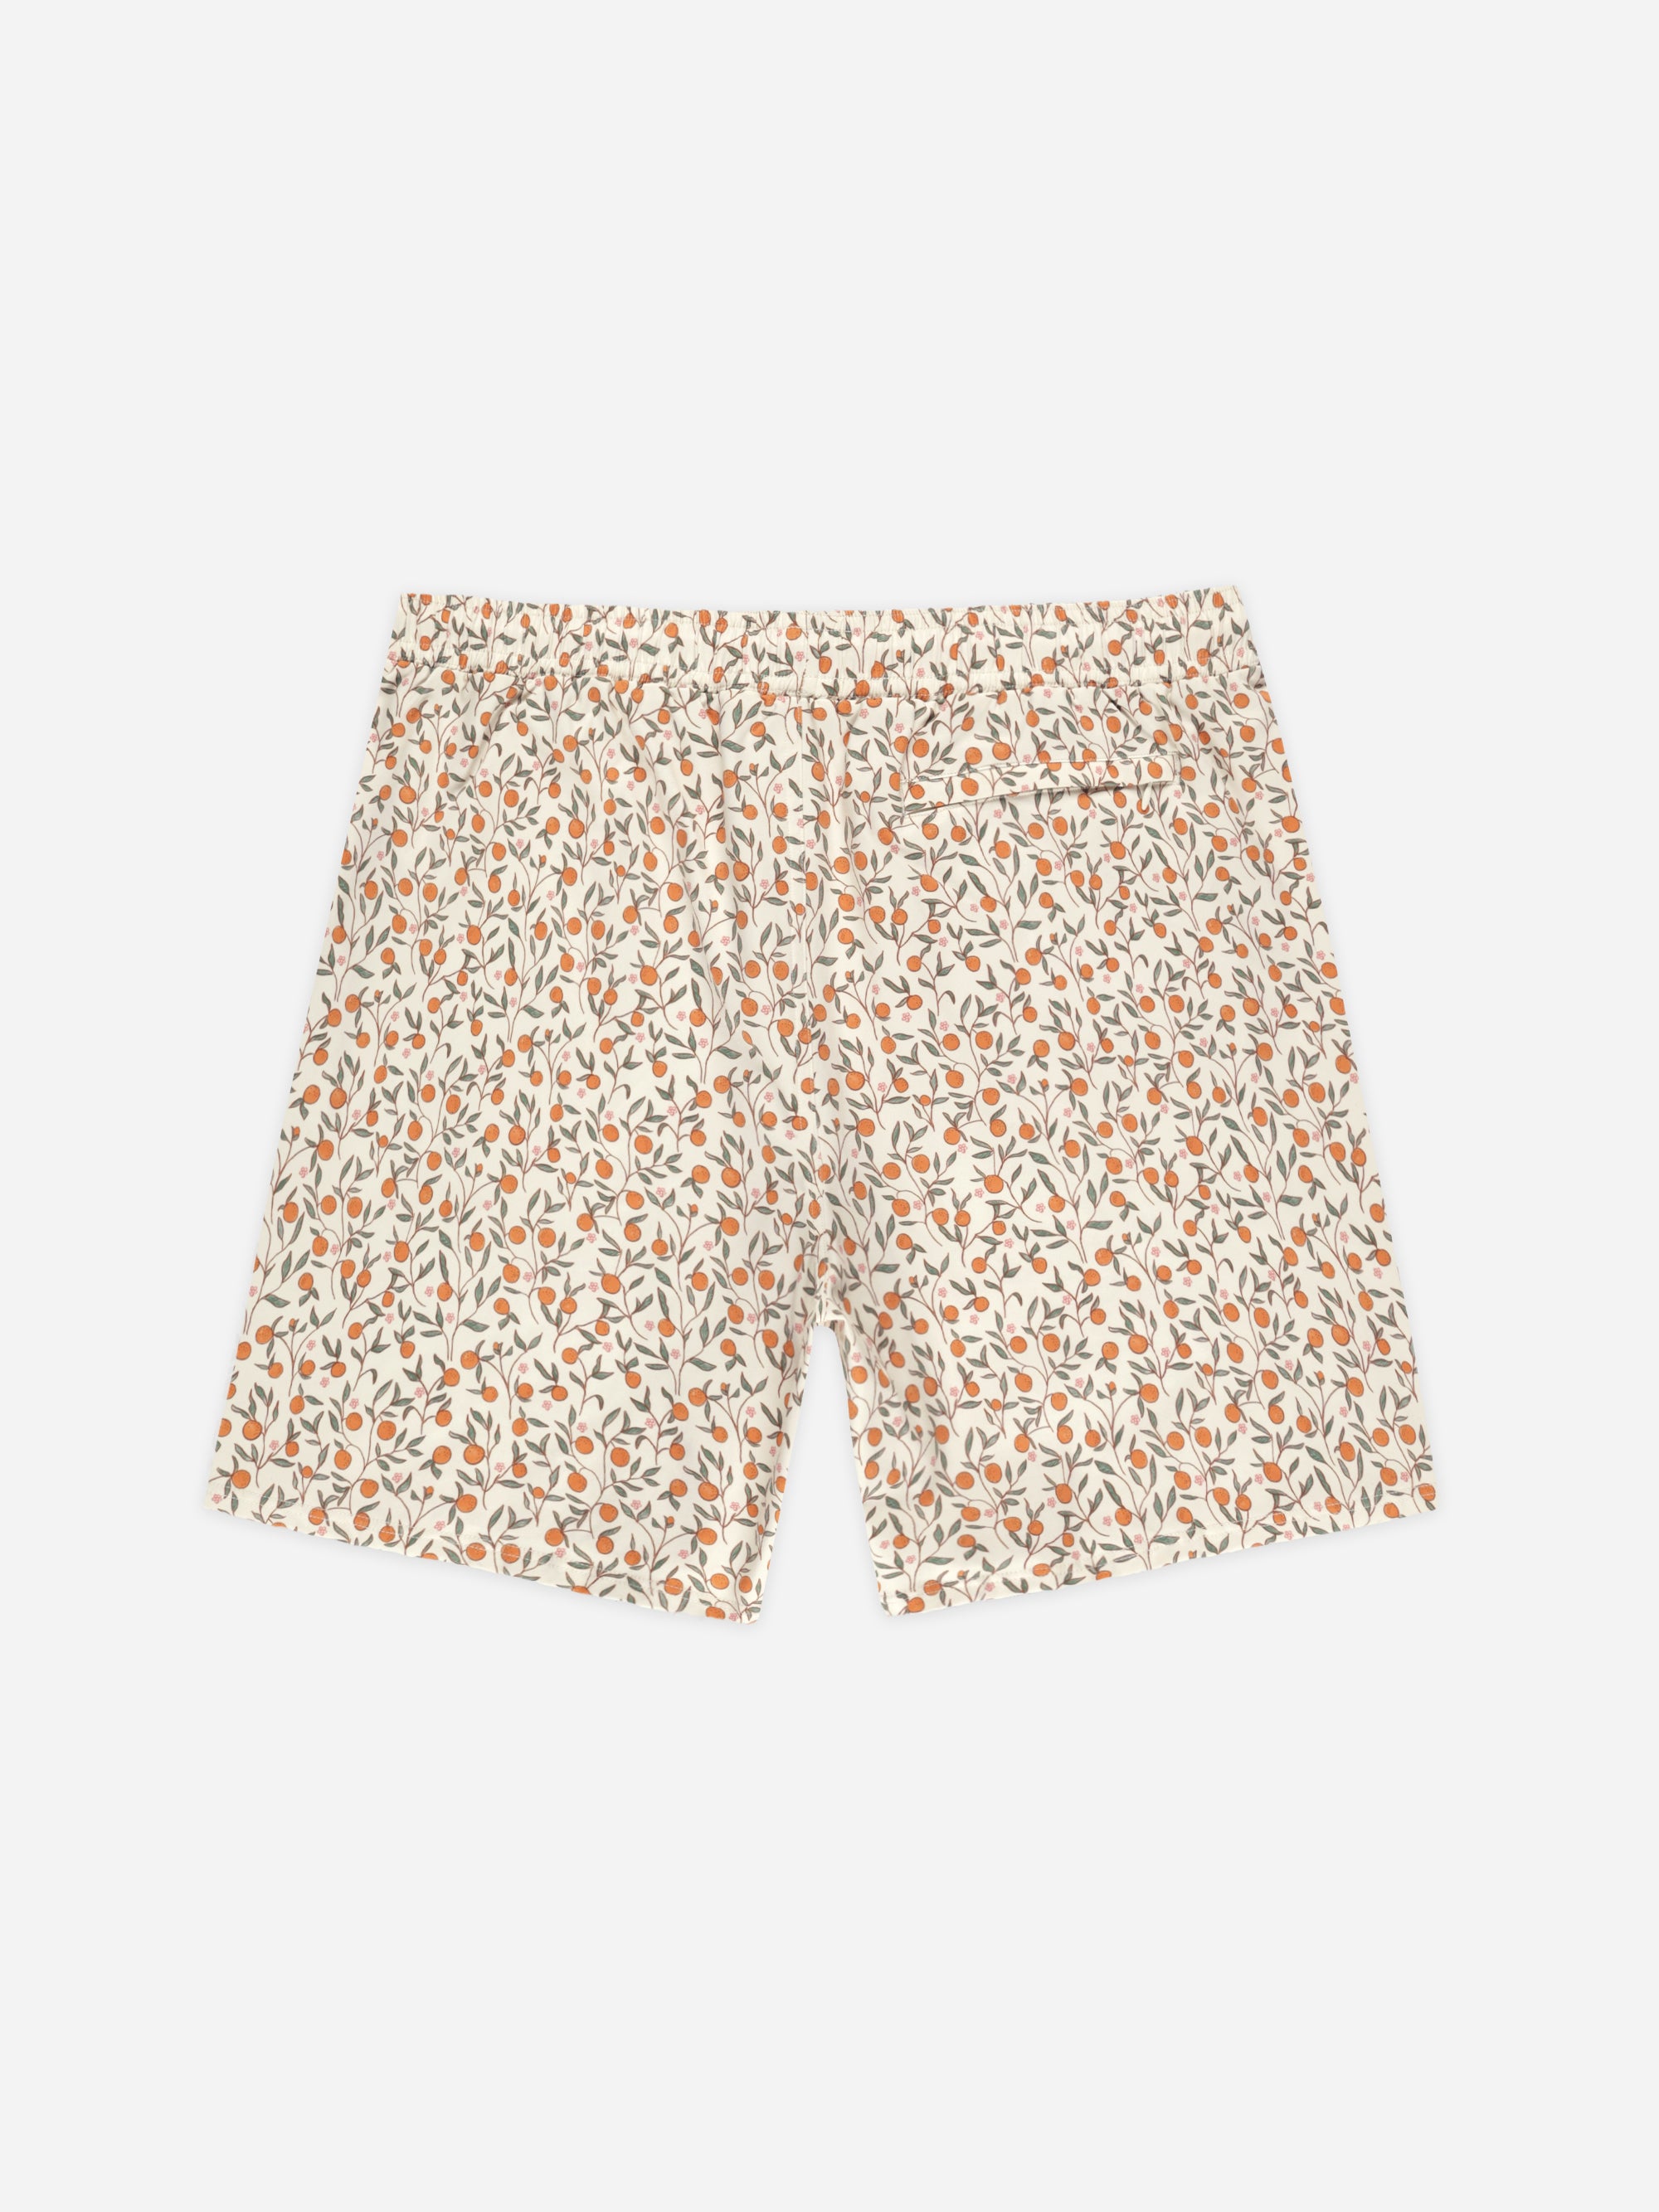 Boardshort | Citrus - Rylee + Cru | Kids Clothes | Trendy Baby Clothes | Modern Infant Outfits |